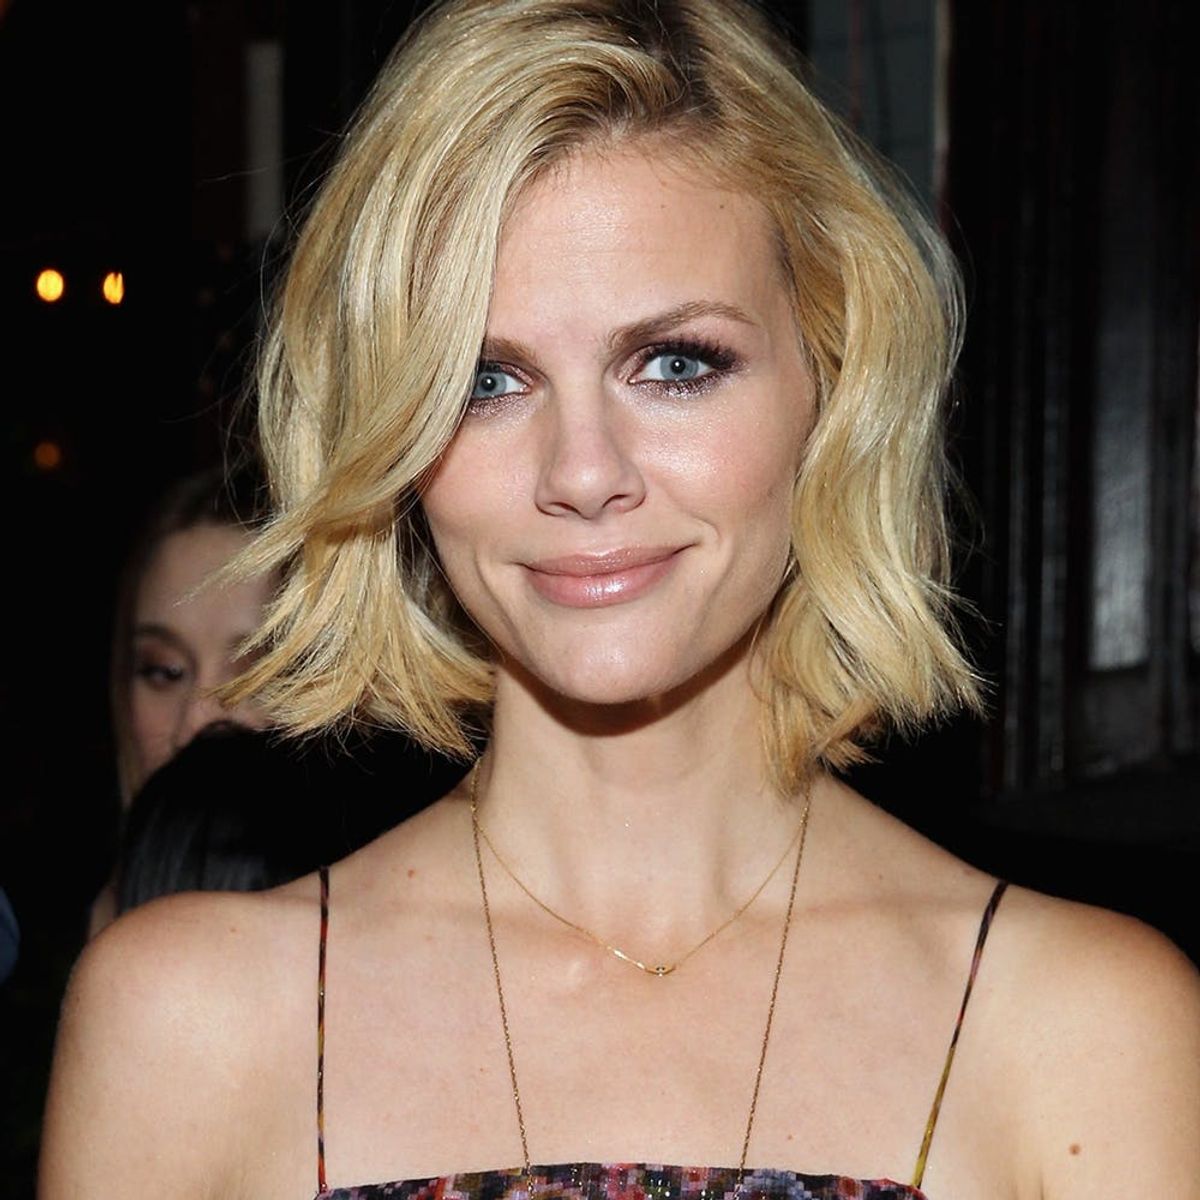 Brooklyn Decker Just Debuted an Unexpected Summer Hair Color